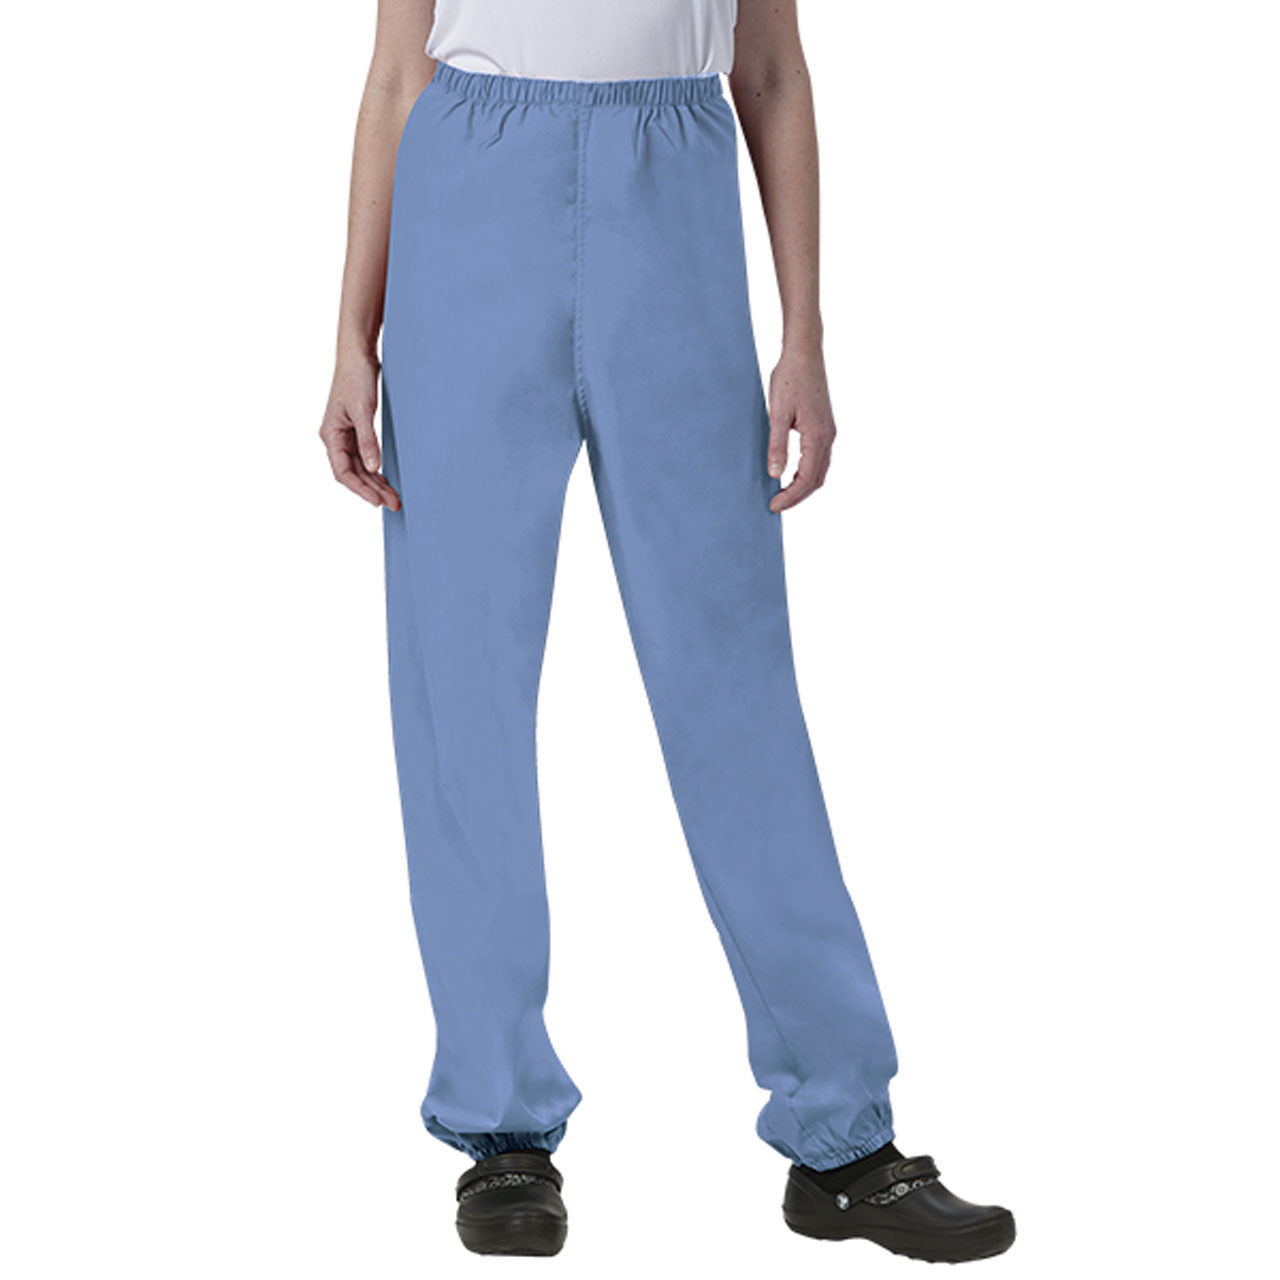 https://cdn11.bigcommerce.com/s-zd141b7qtp/images/stencil/1280x1280/products/47253/156992/wholesale-scrub-pants-elastic-no-pocket-in-ceil-blue-unisex-pack-of-72-fashion-seal-healthcare__83736.1708425178.jpg?c=1